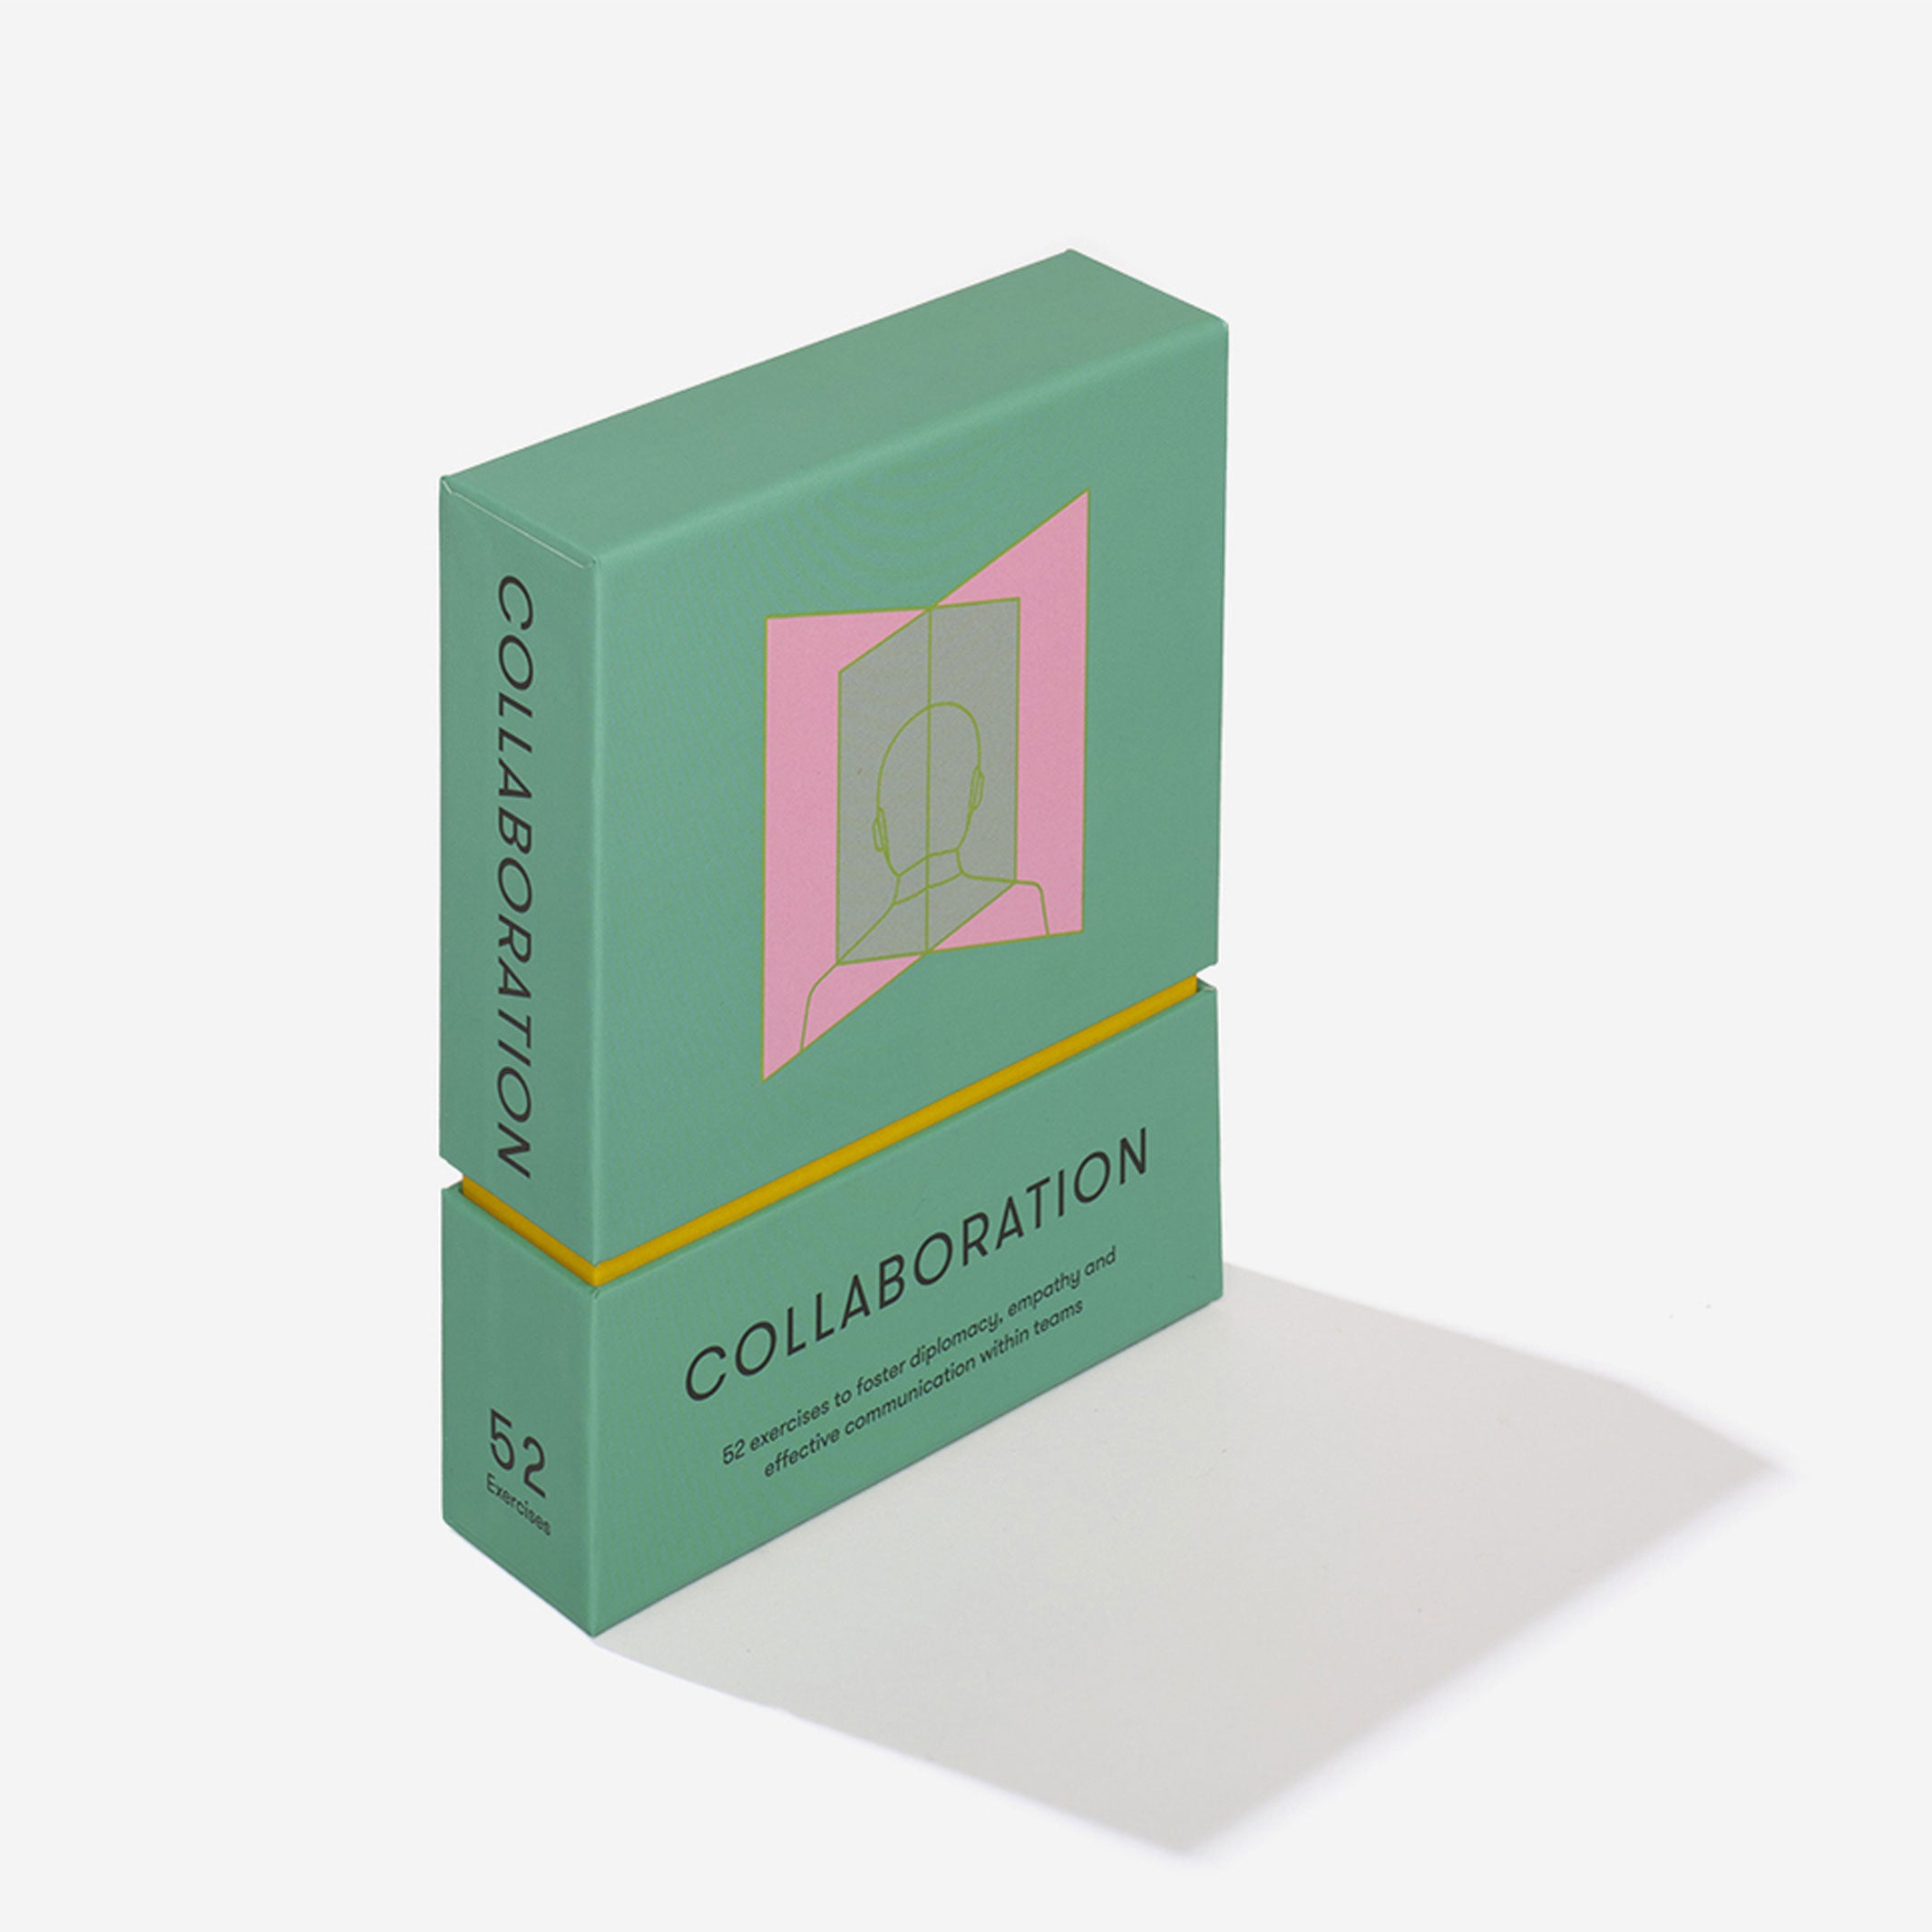 COLLABORATION CARD SET | Promotion v. COLLABORATION | 52 exercices d'anglais | The School of Life